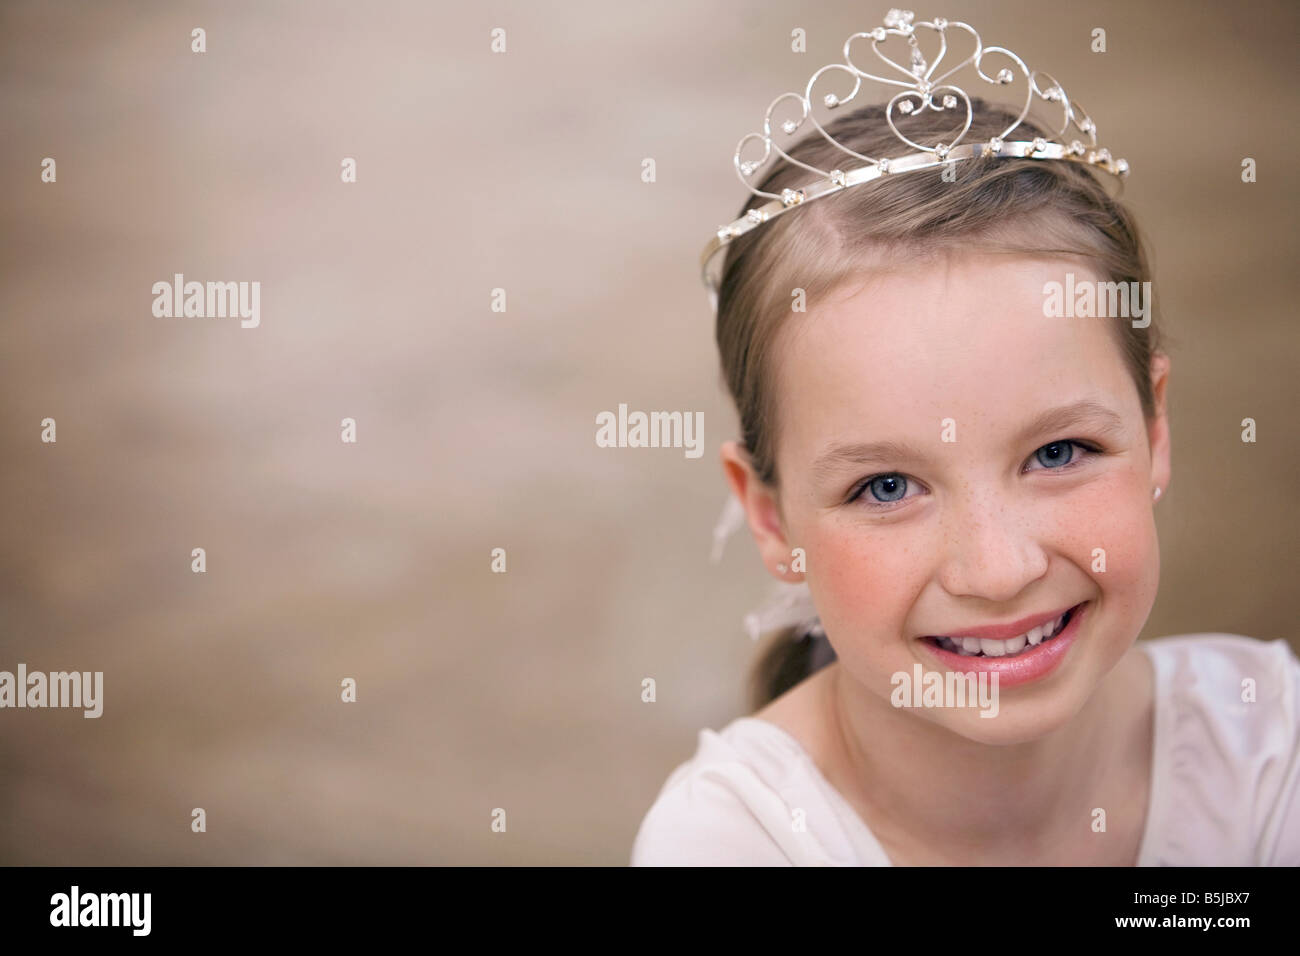 portrait of young ballet dancer wearing little crown Stock Photo